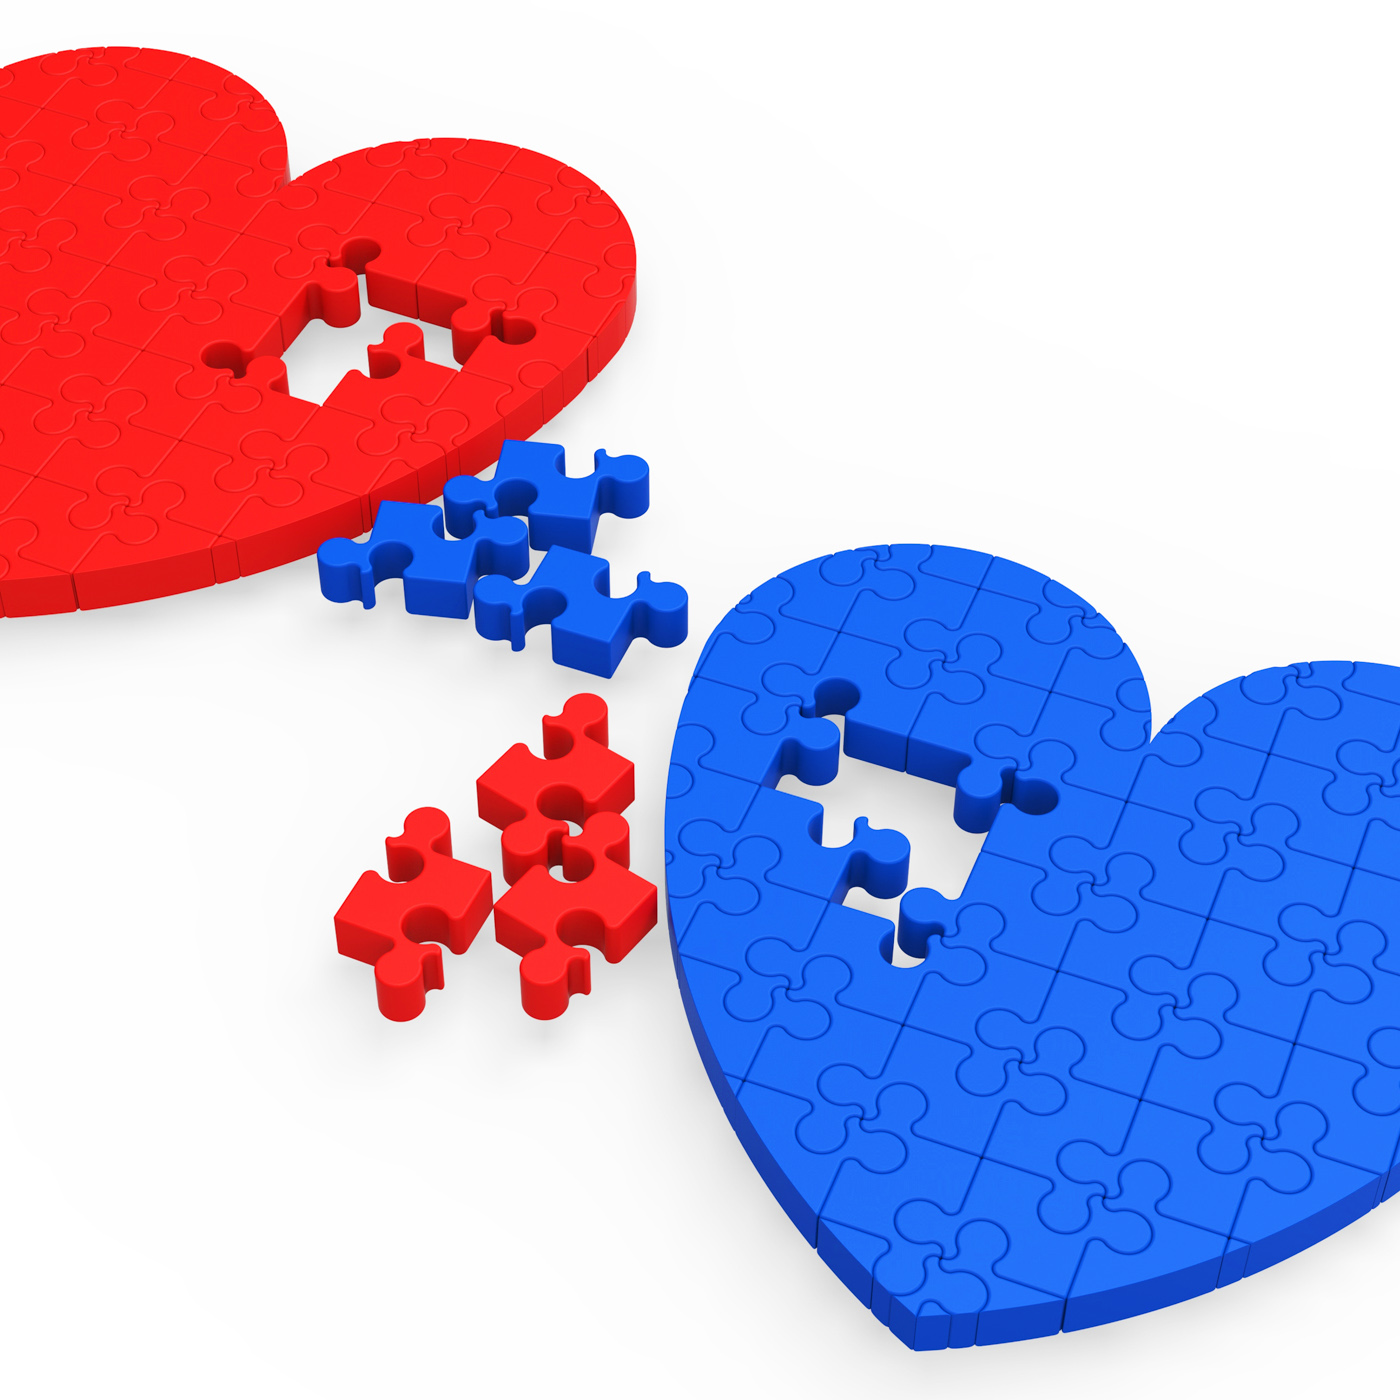 Two 3d hearts showing love partners photo